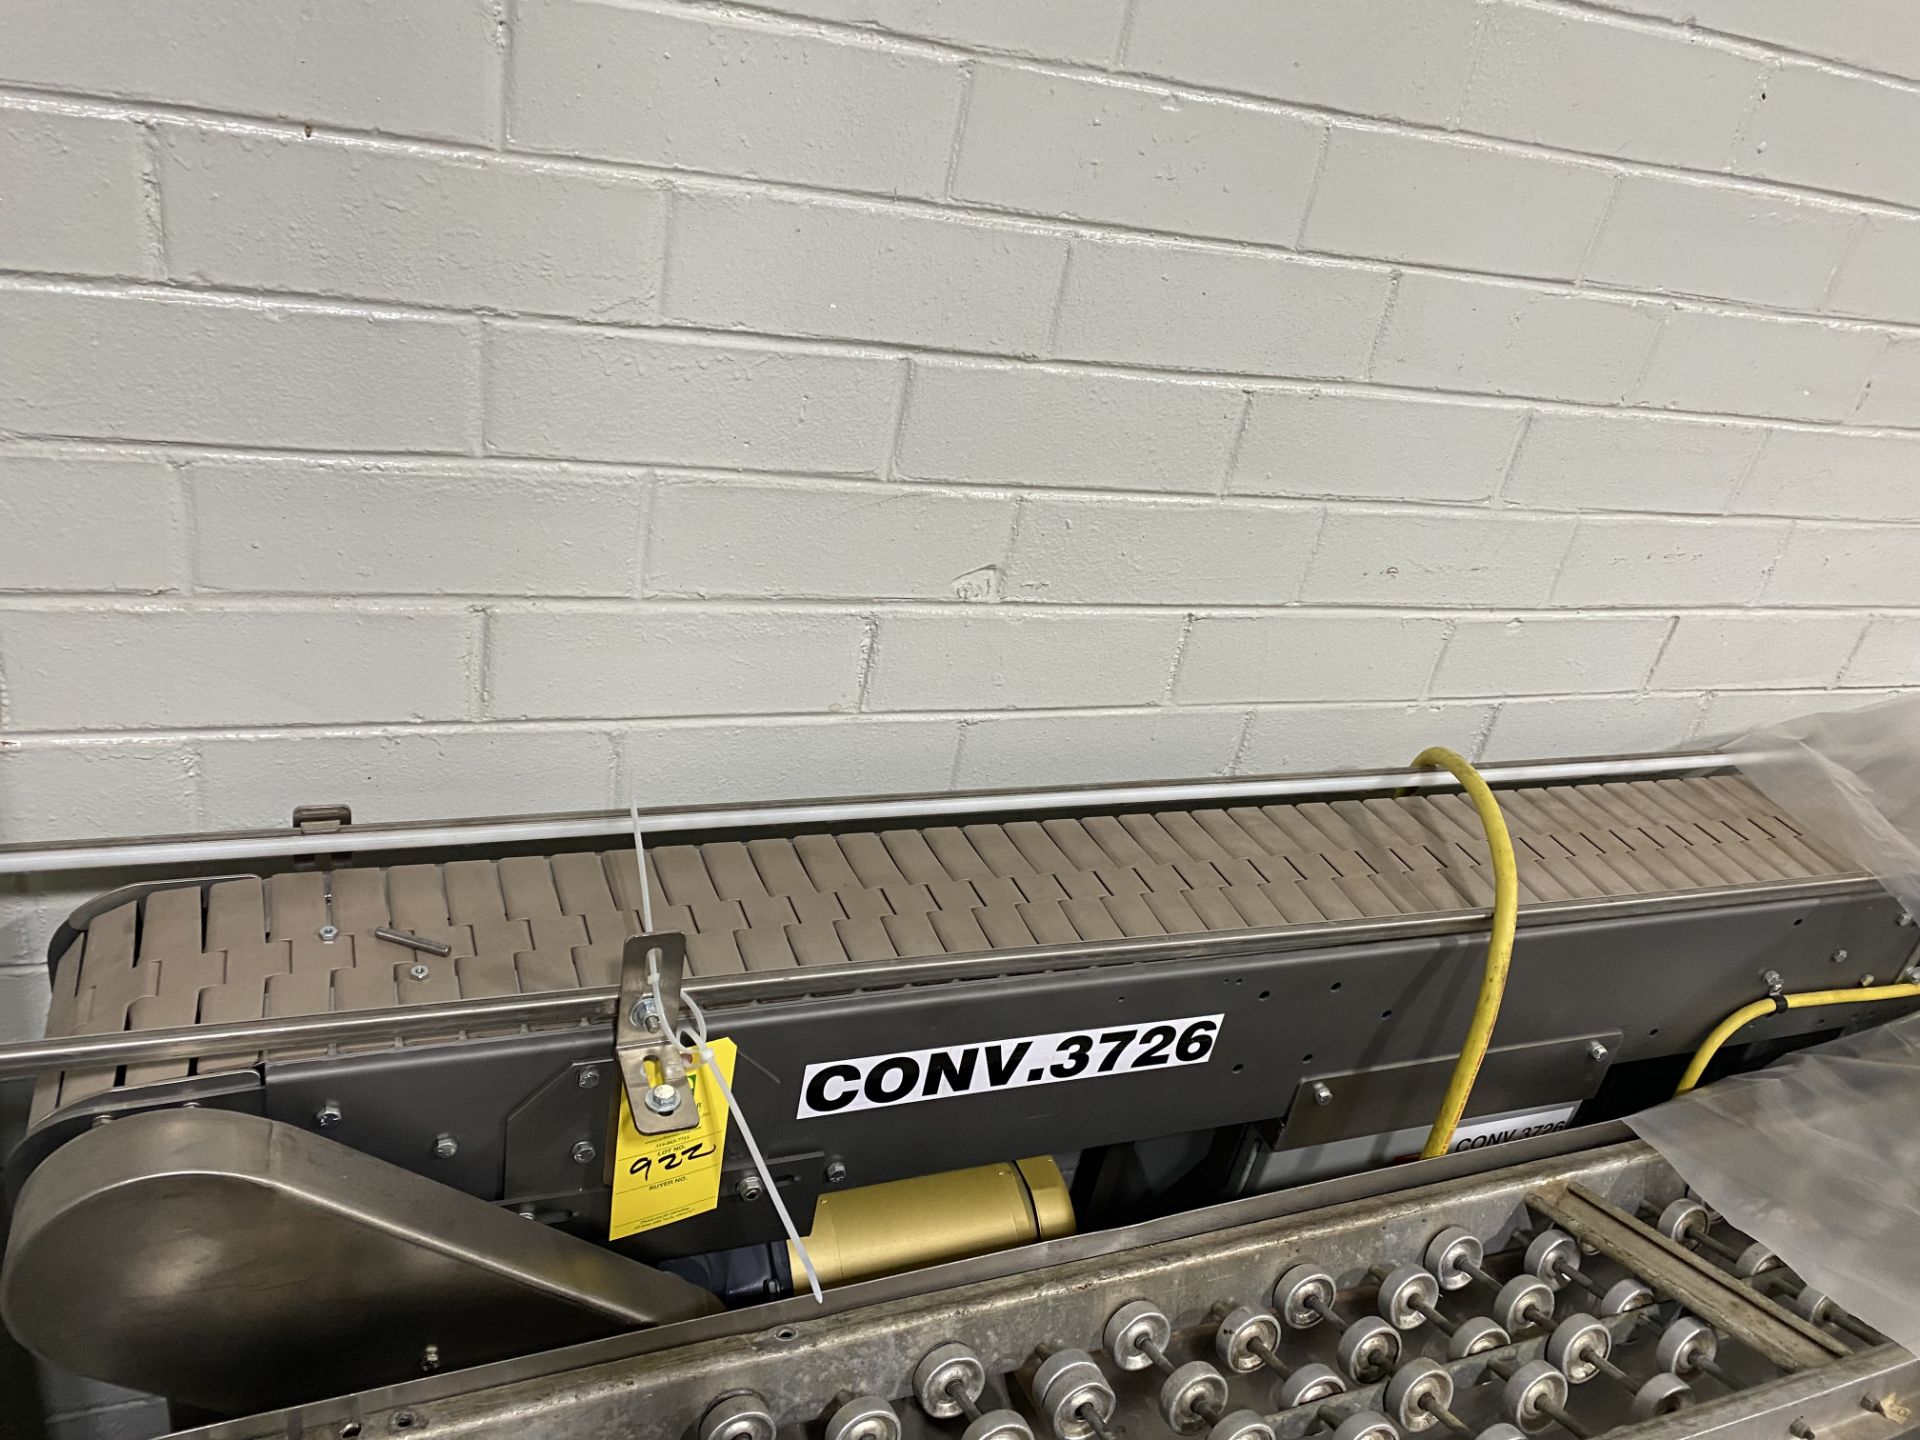 (Qty. 3) Conveyor Pieces, 8'' W x 22' L, Located in London, KY